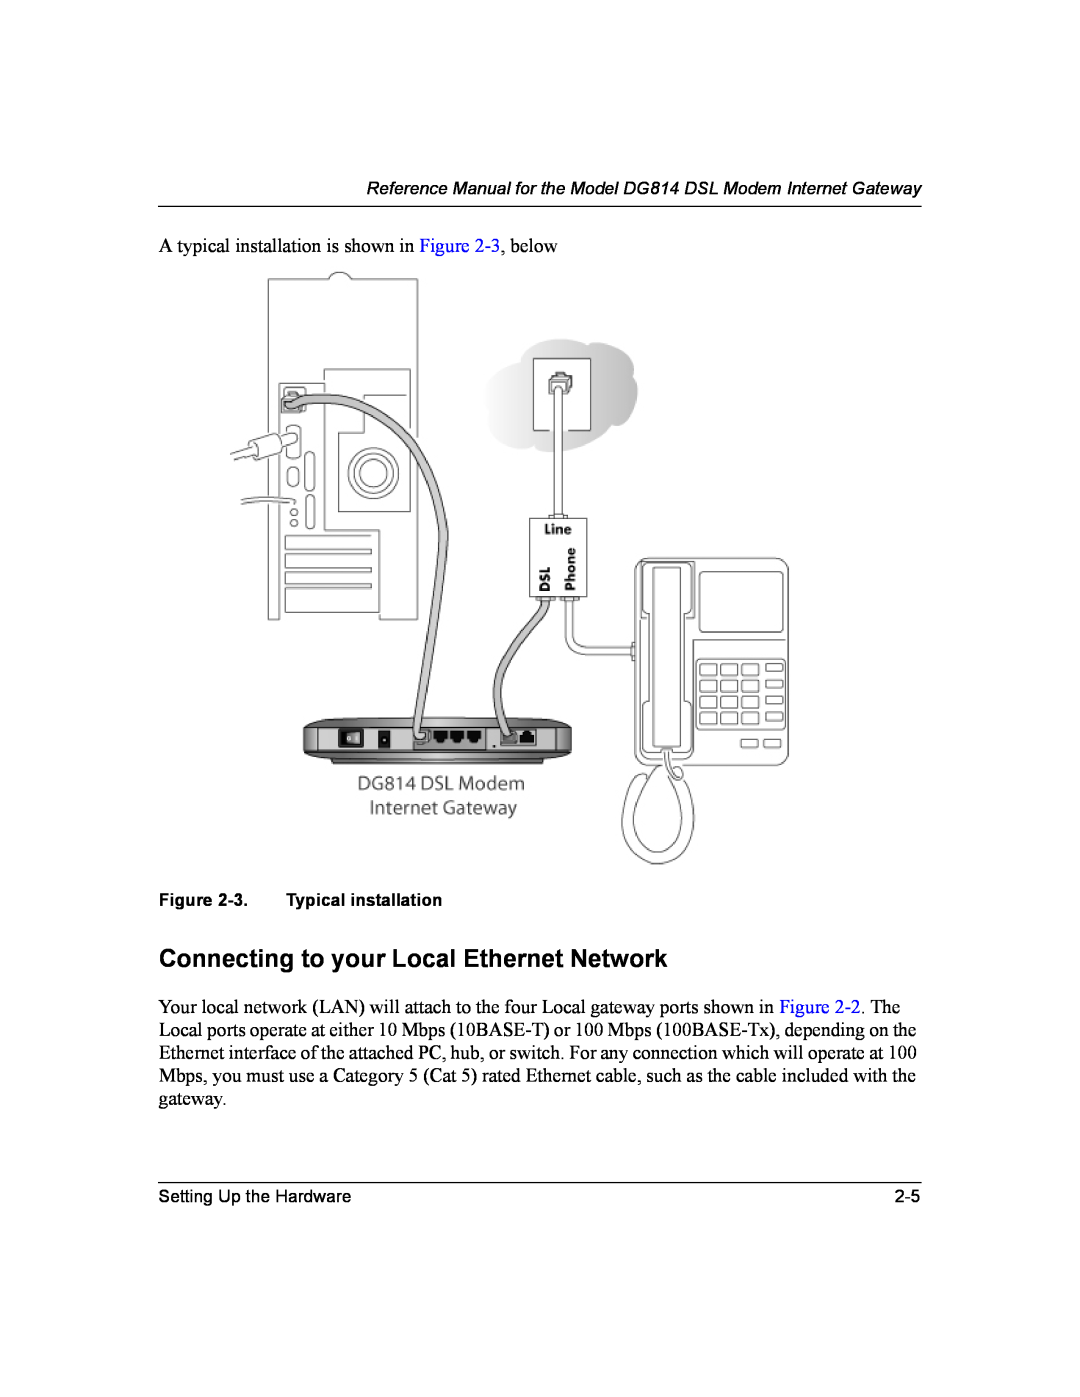 NETGEAR DG814 DSL manual Connecting to your Local Ethernet Network 